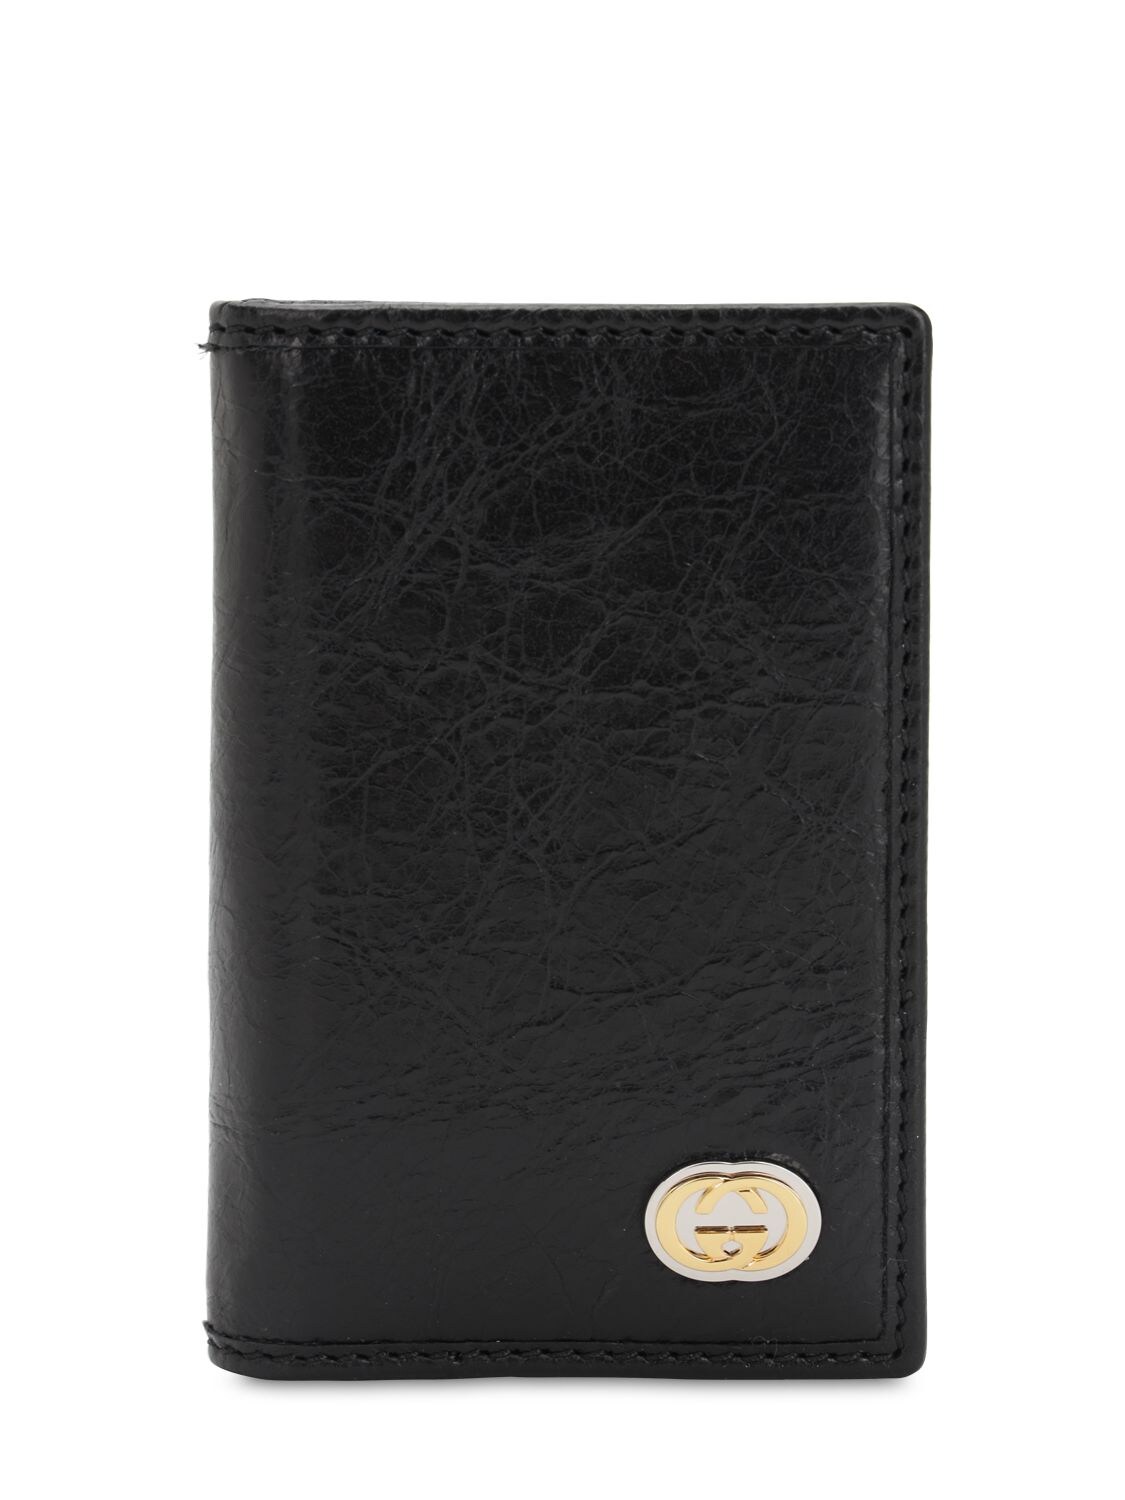 Gucci Gg Metal Leather Card Wallet In Black